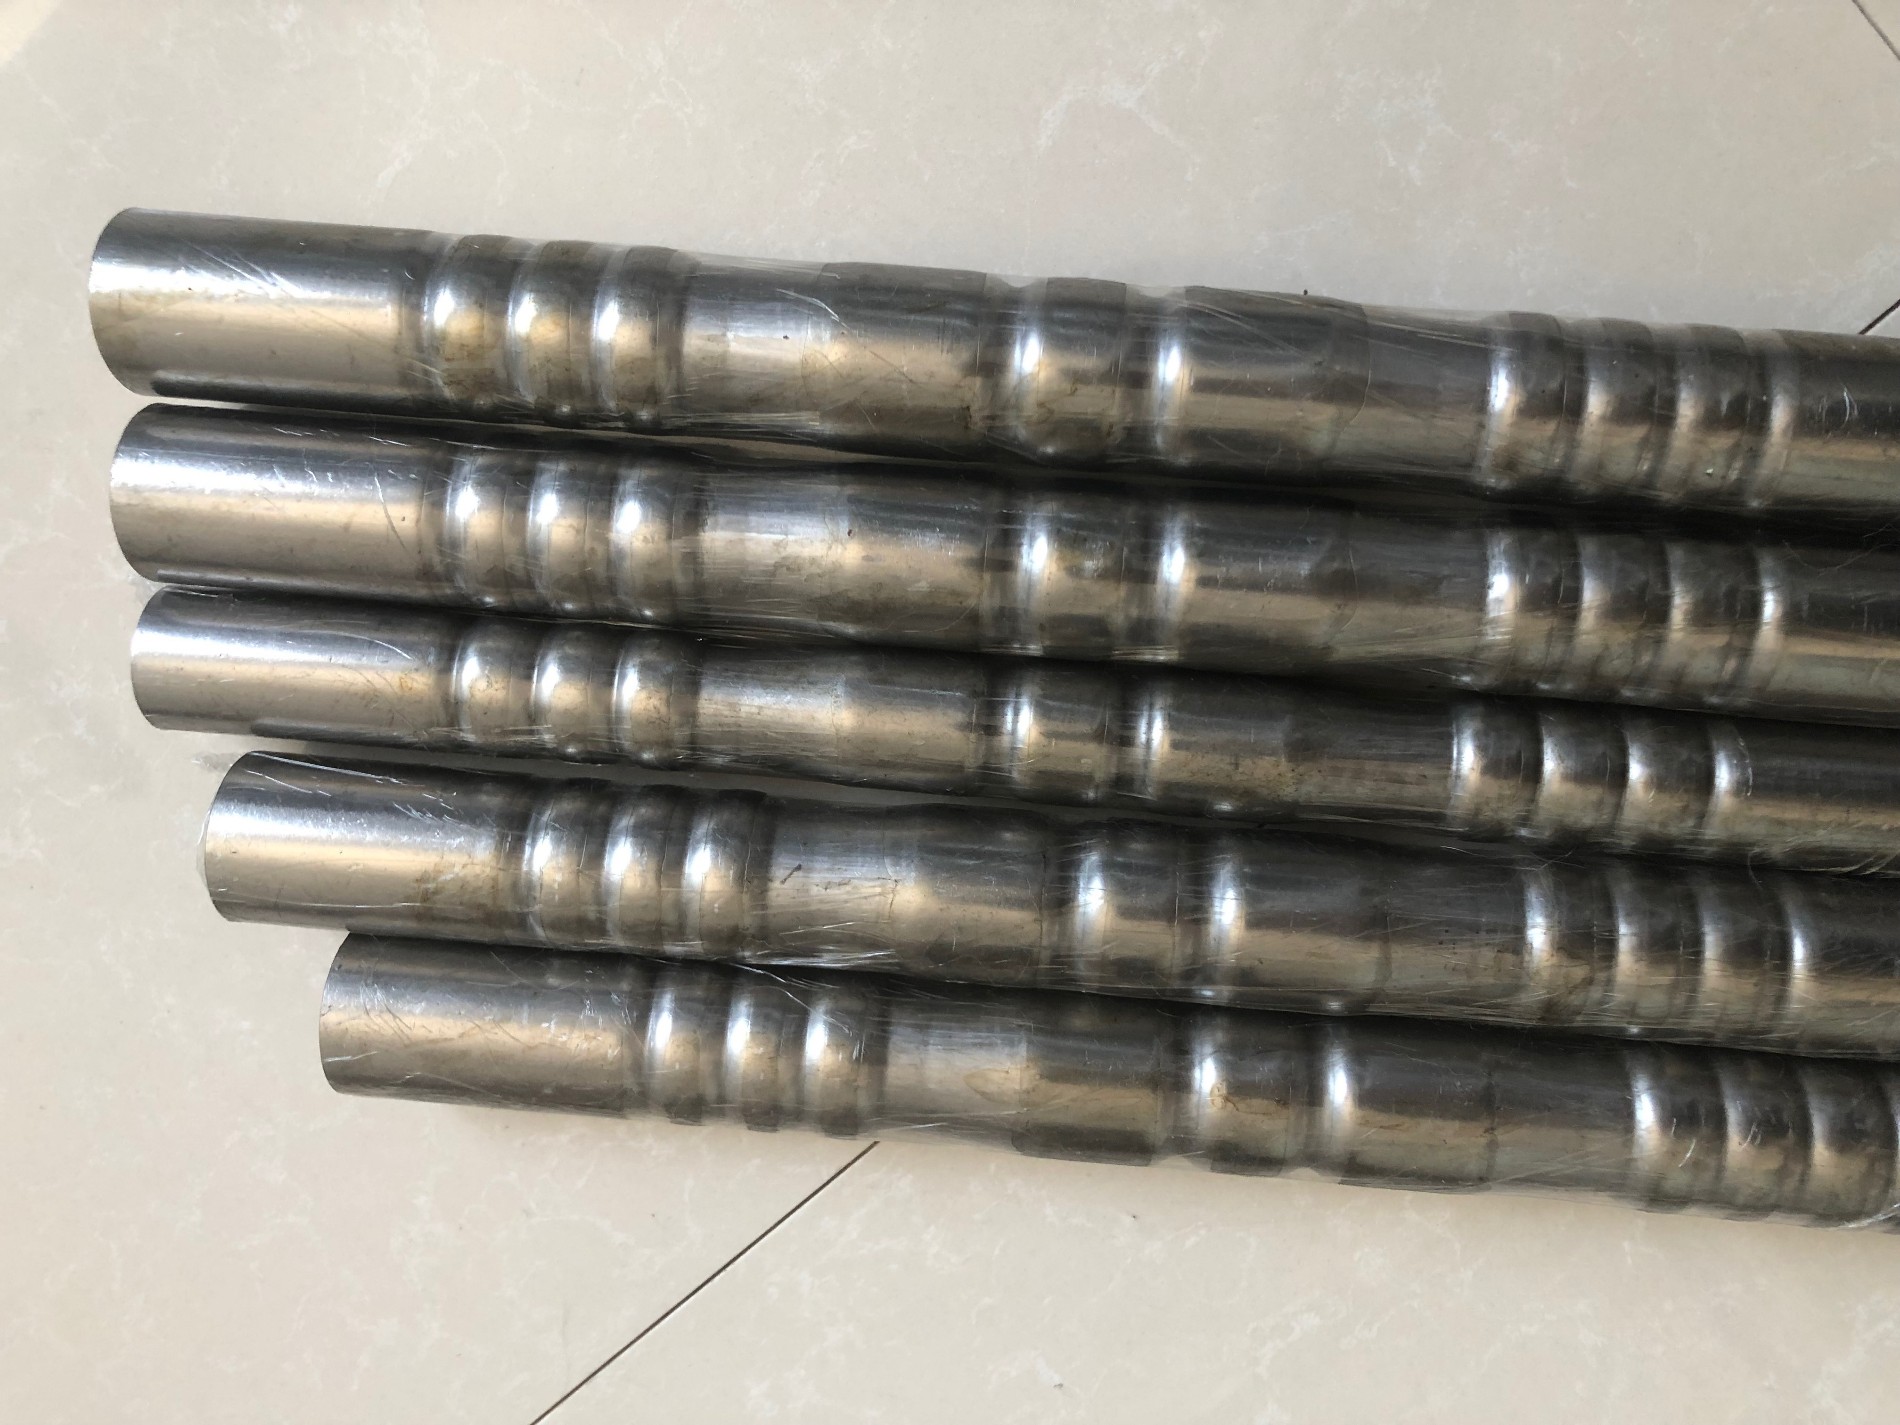 Ladder Pipes Manufacturers, Ladder Pipes Factory, Supply Ladder Pipes